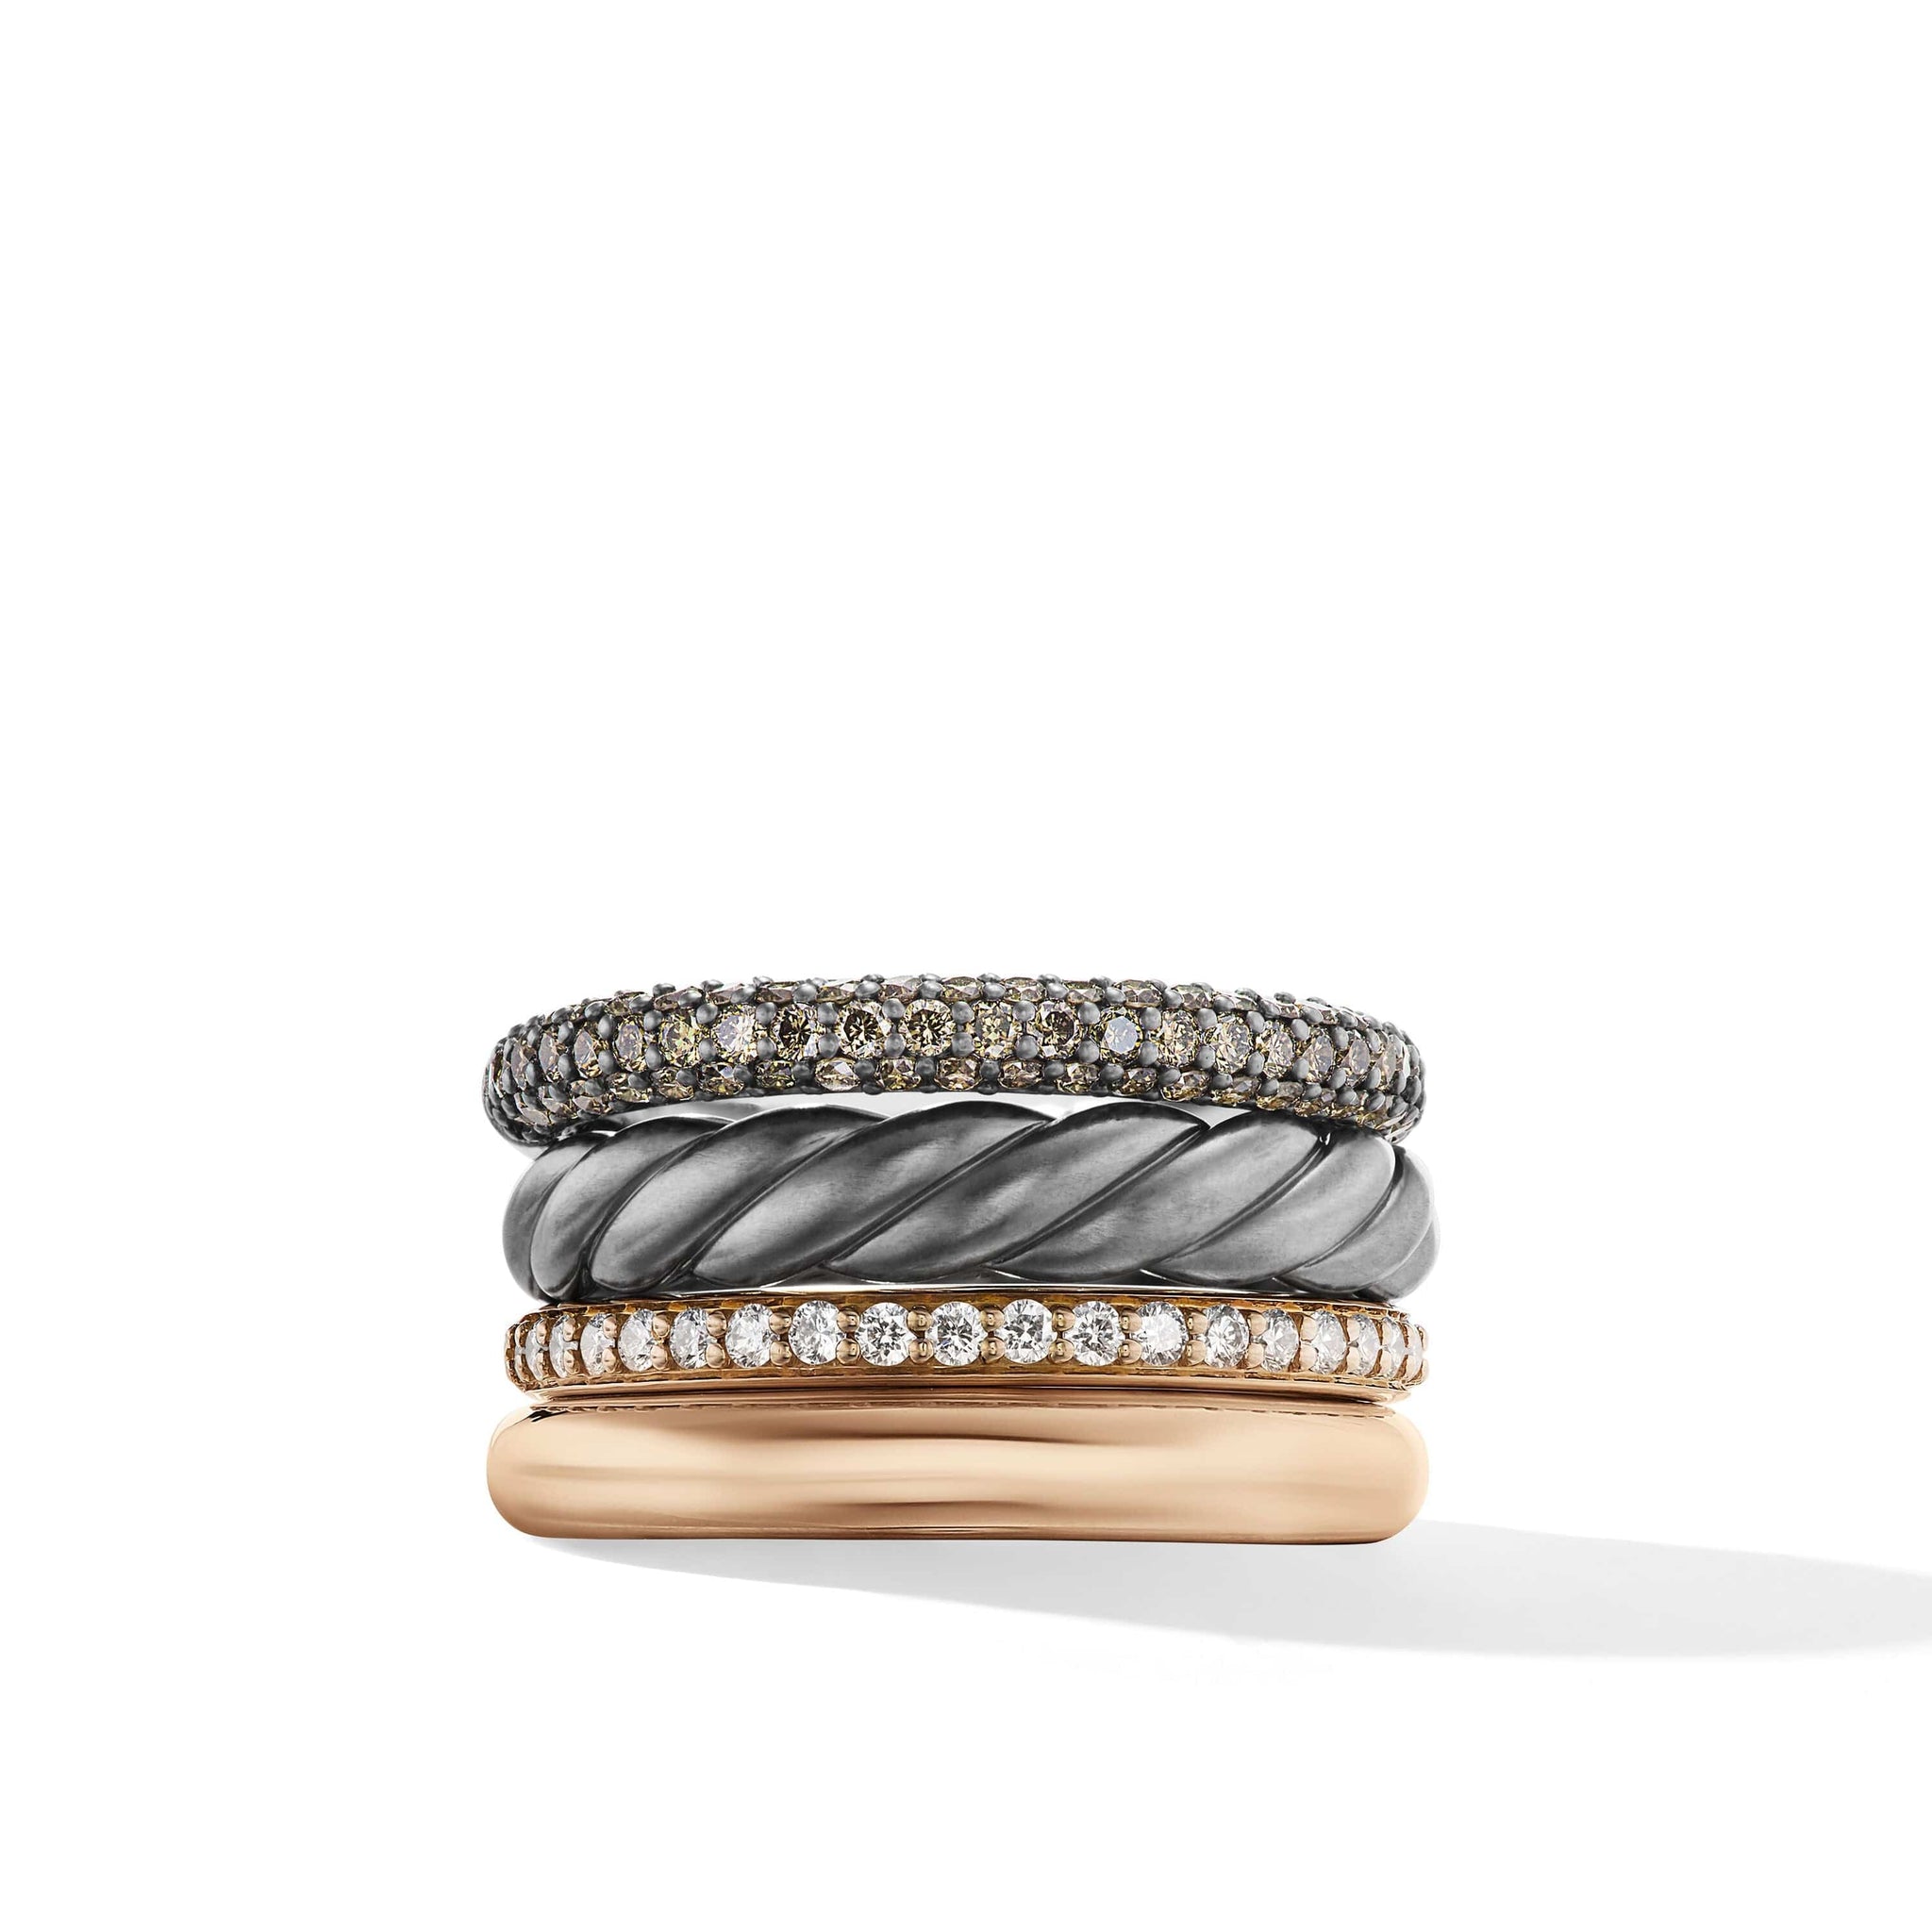 DY Mercer™ Melange Multi Row Ring in Sterling Silver with 18K Rose Gold and Pavé Diamonds